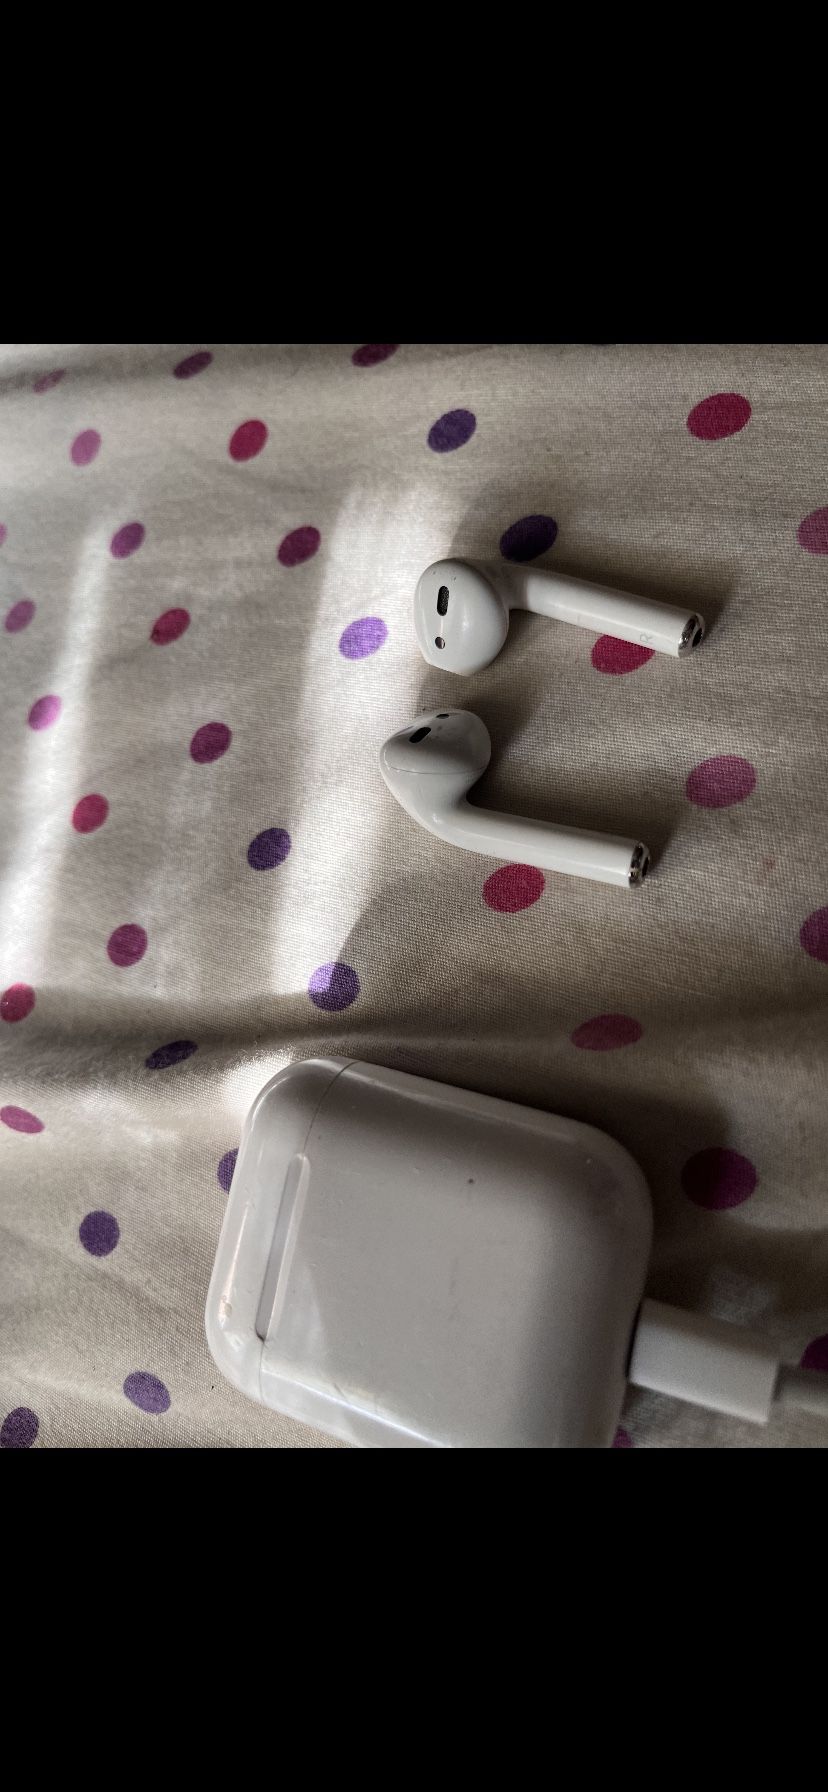  Apple AirPods (2nd Gen) with Charging Case